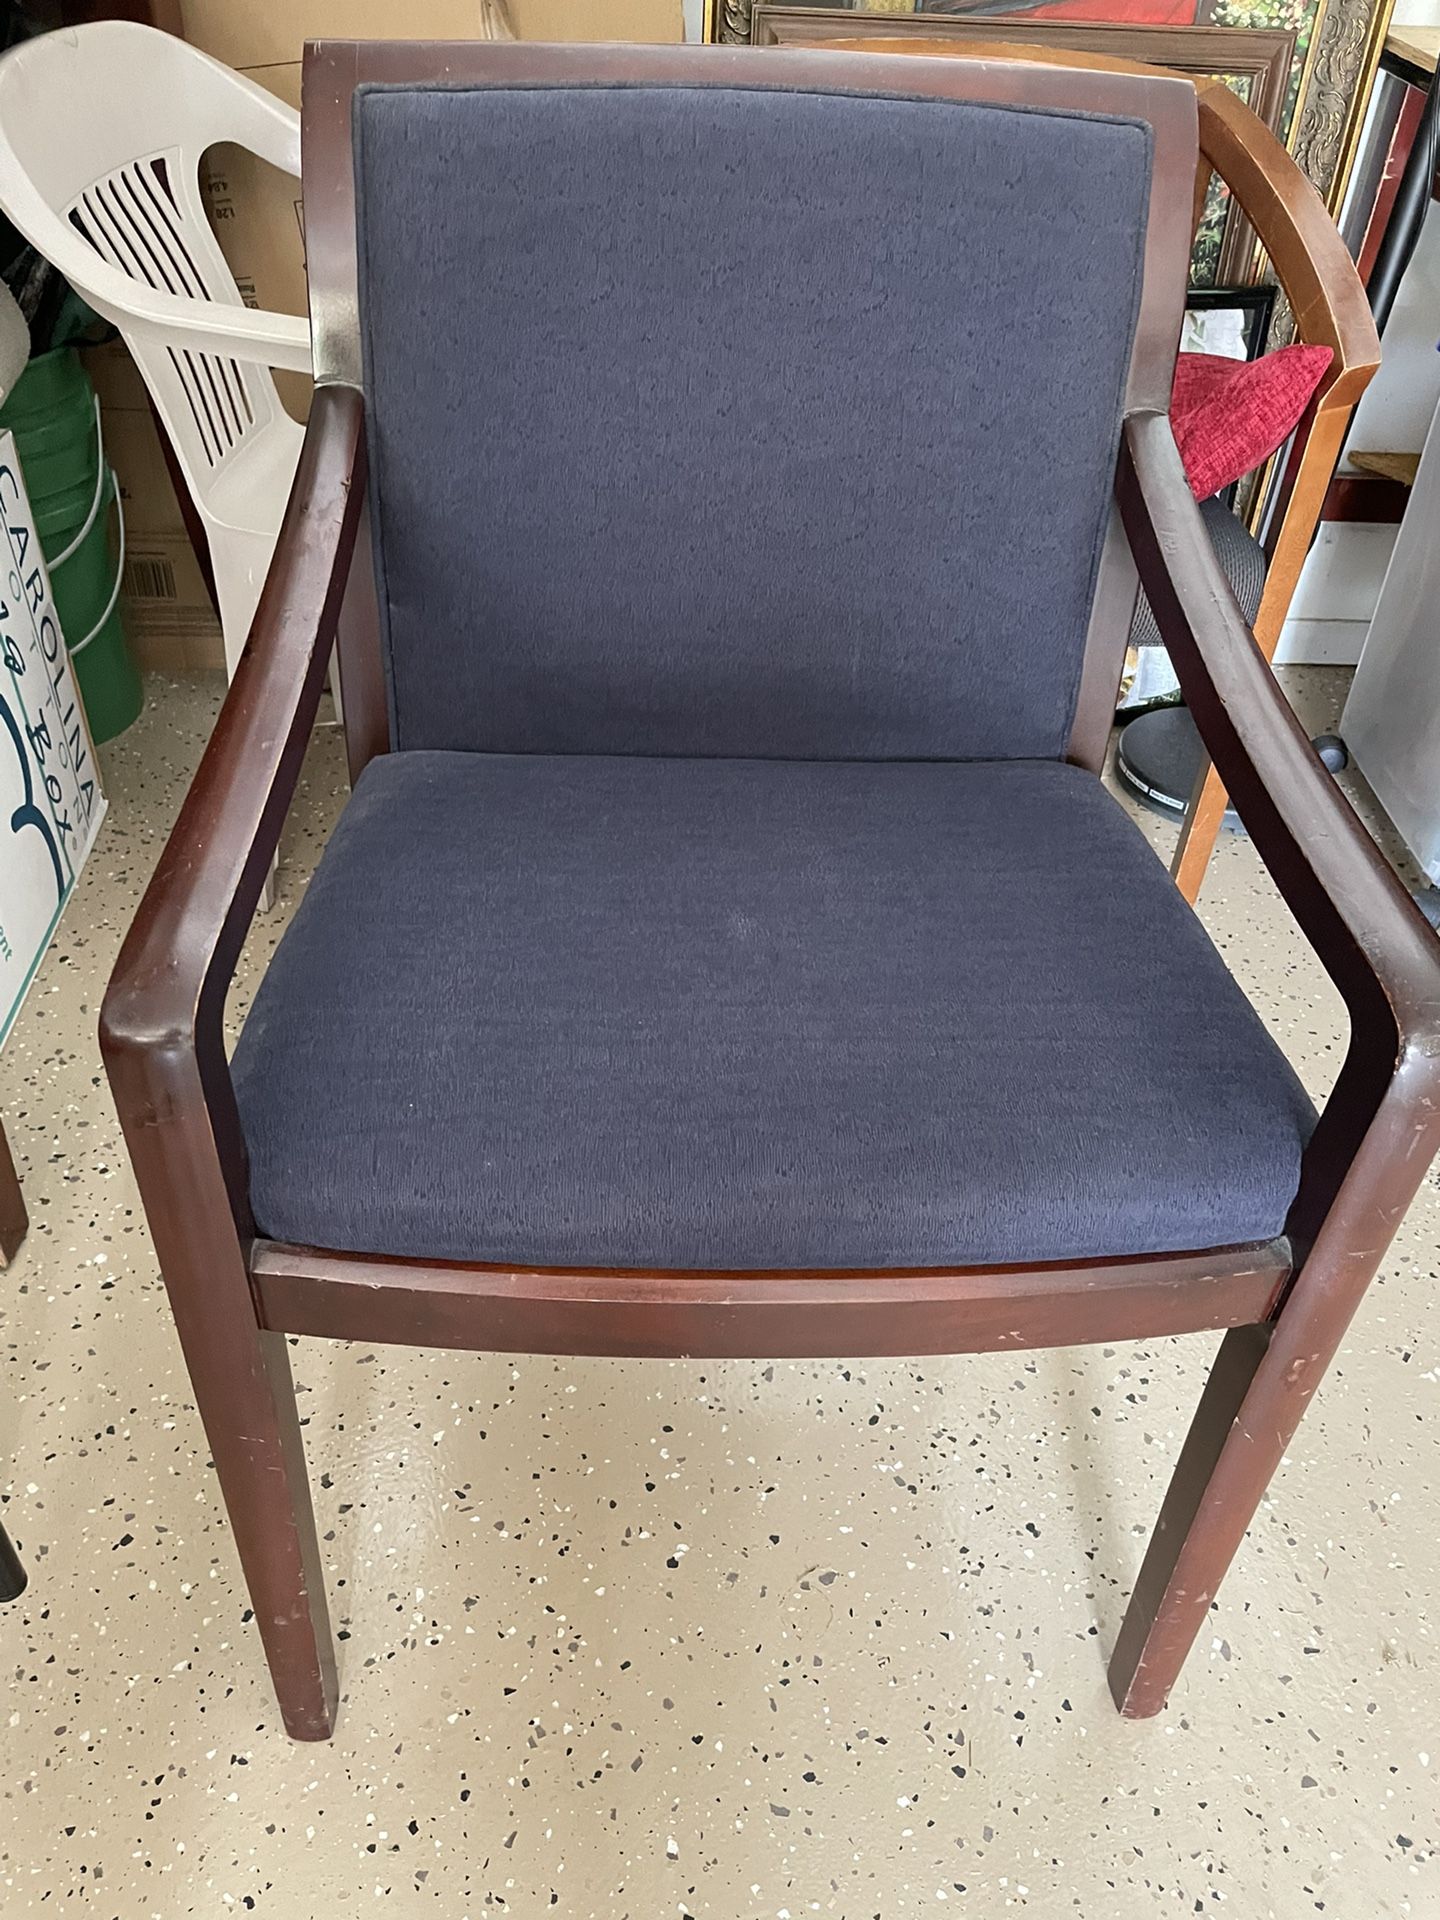 Chairs Very Good Condition $25 Each 